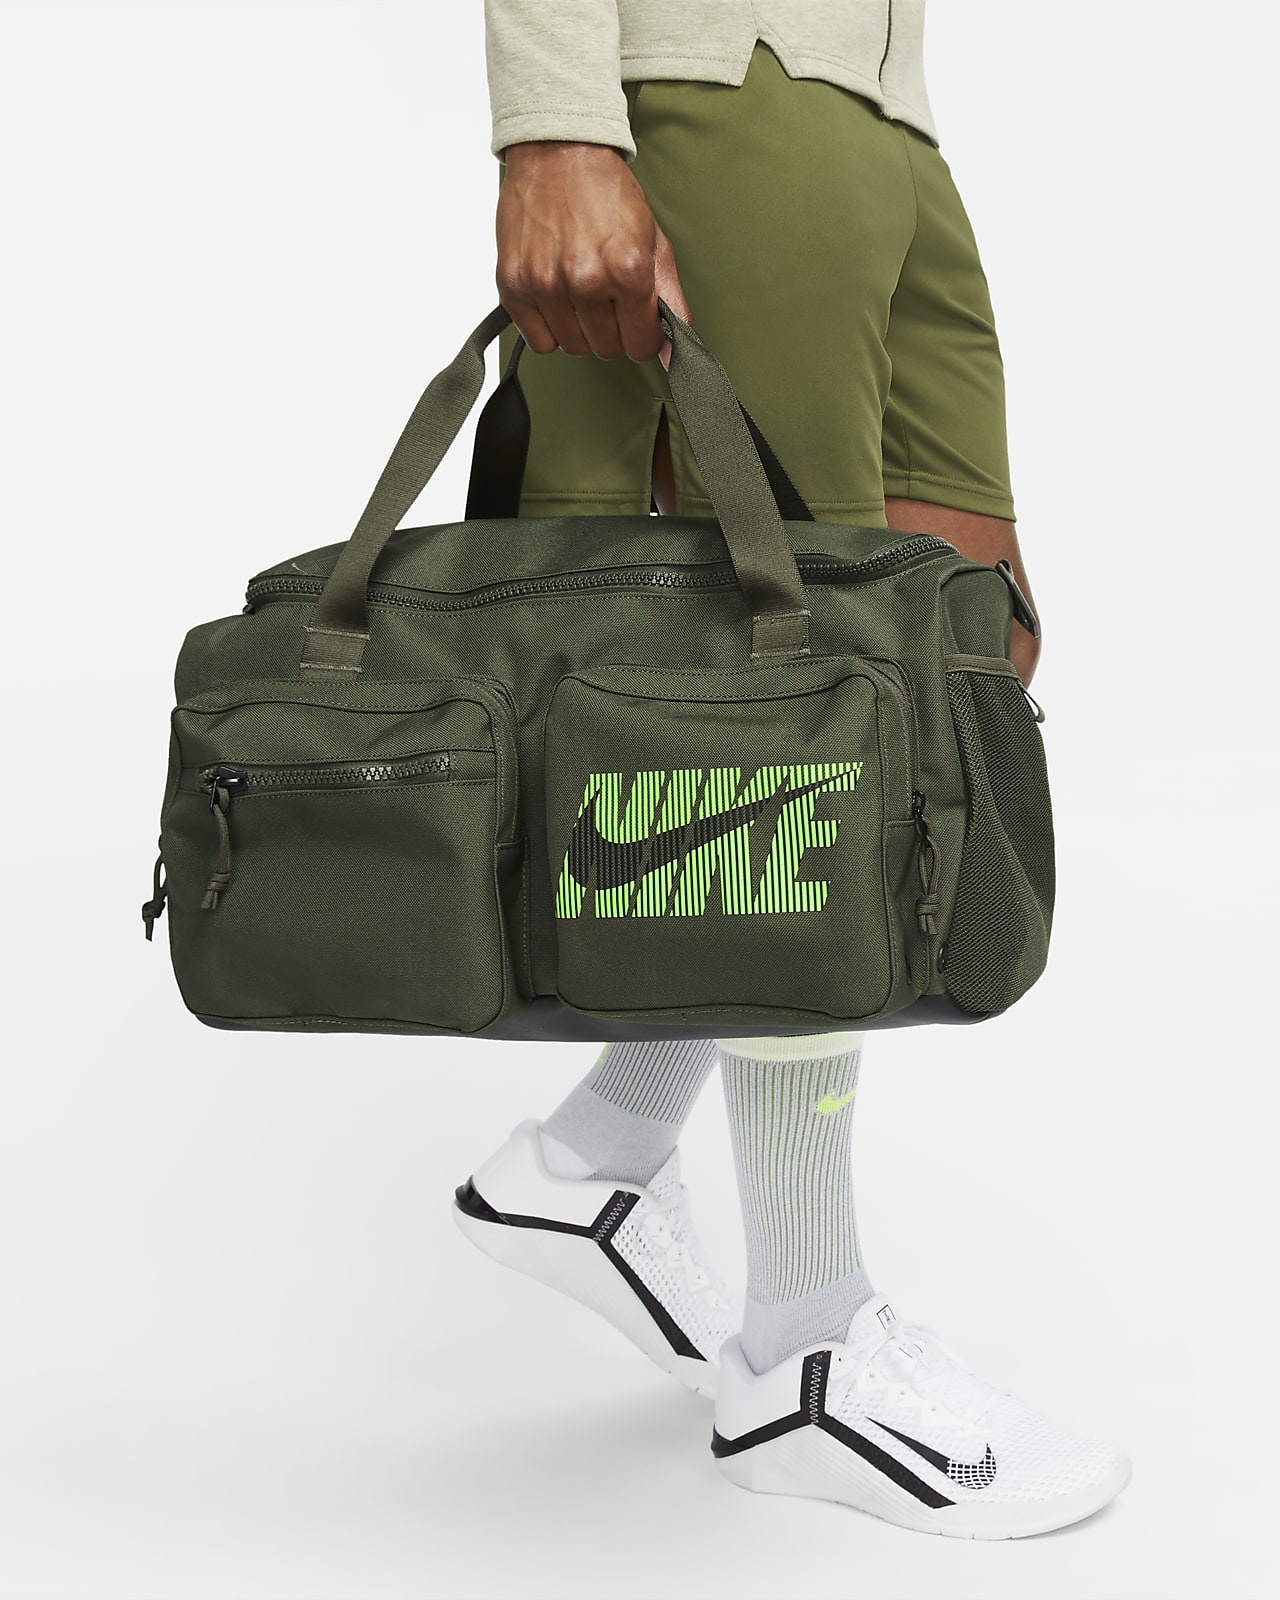 The 9 best basketball backpacks & bags for all your gear